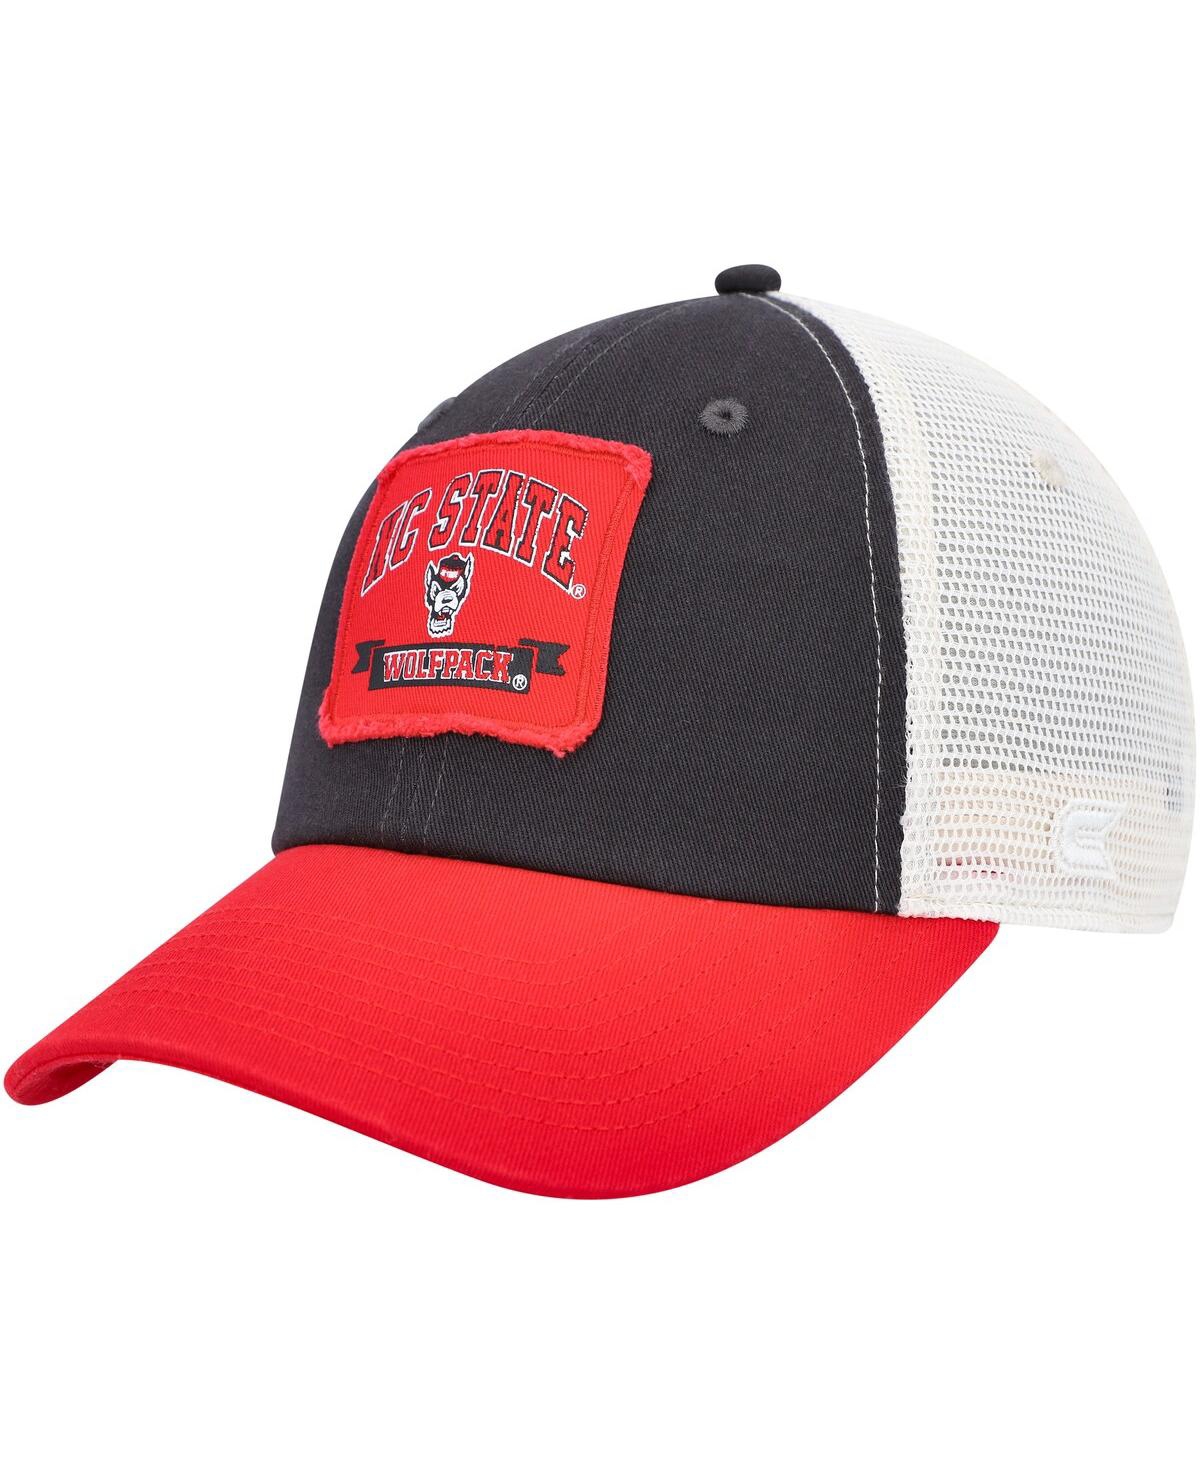 Men's Colosseum Charcoal Nc State Wolfpack Objection Snapback Hat - Charcoal